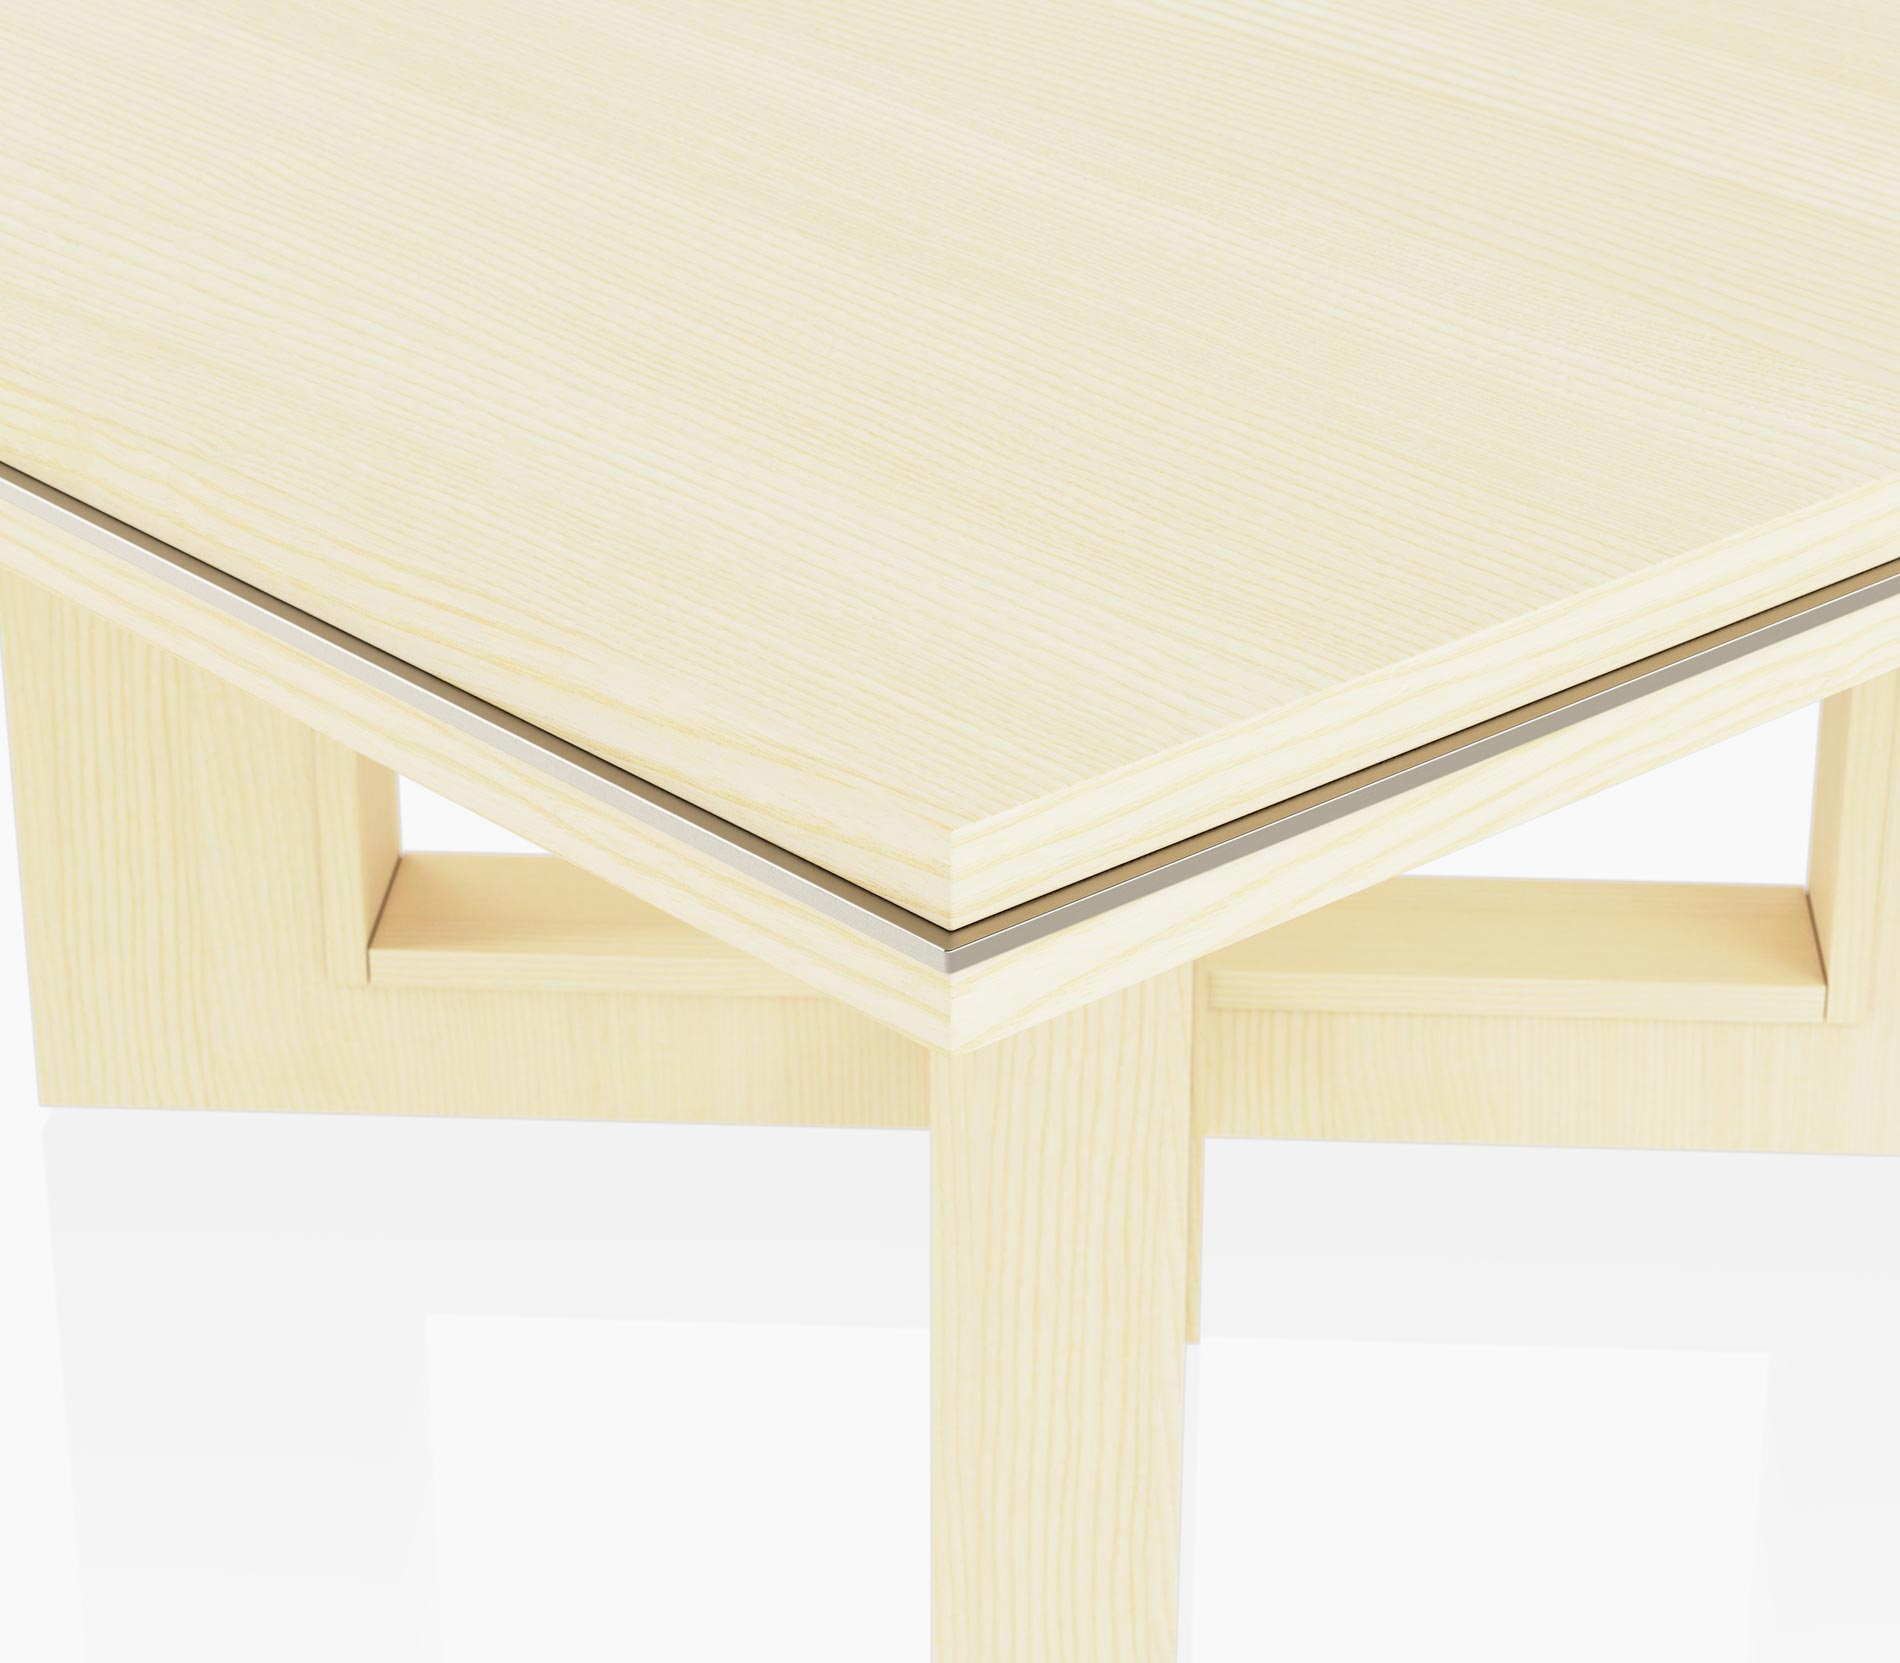 Edge detail of a square Highline Fifty Meeting Table in white quarter cut ash with satin nickel details